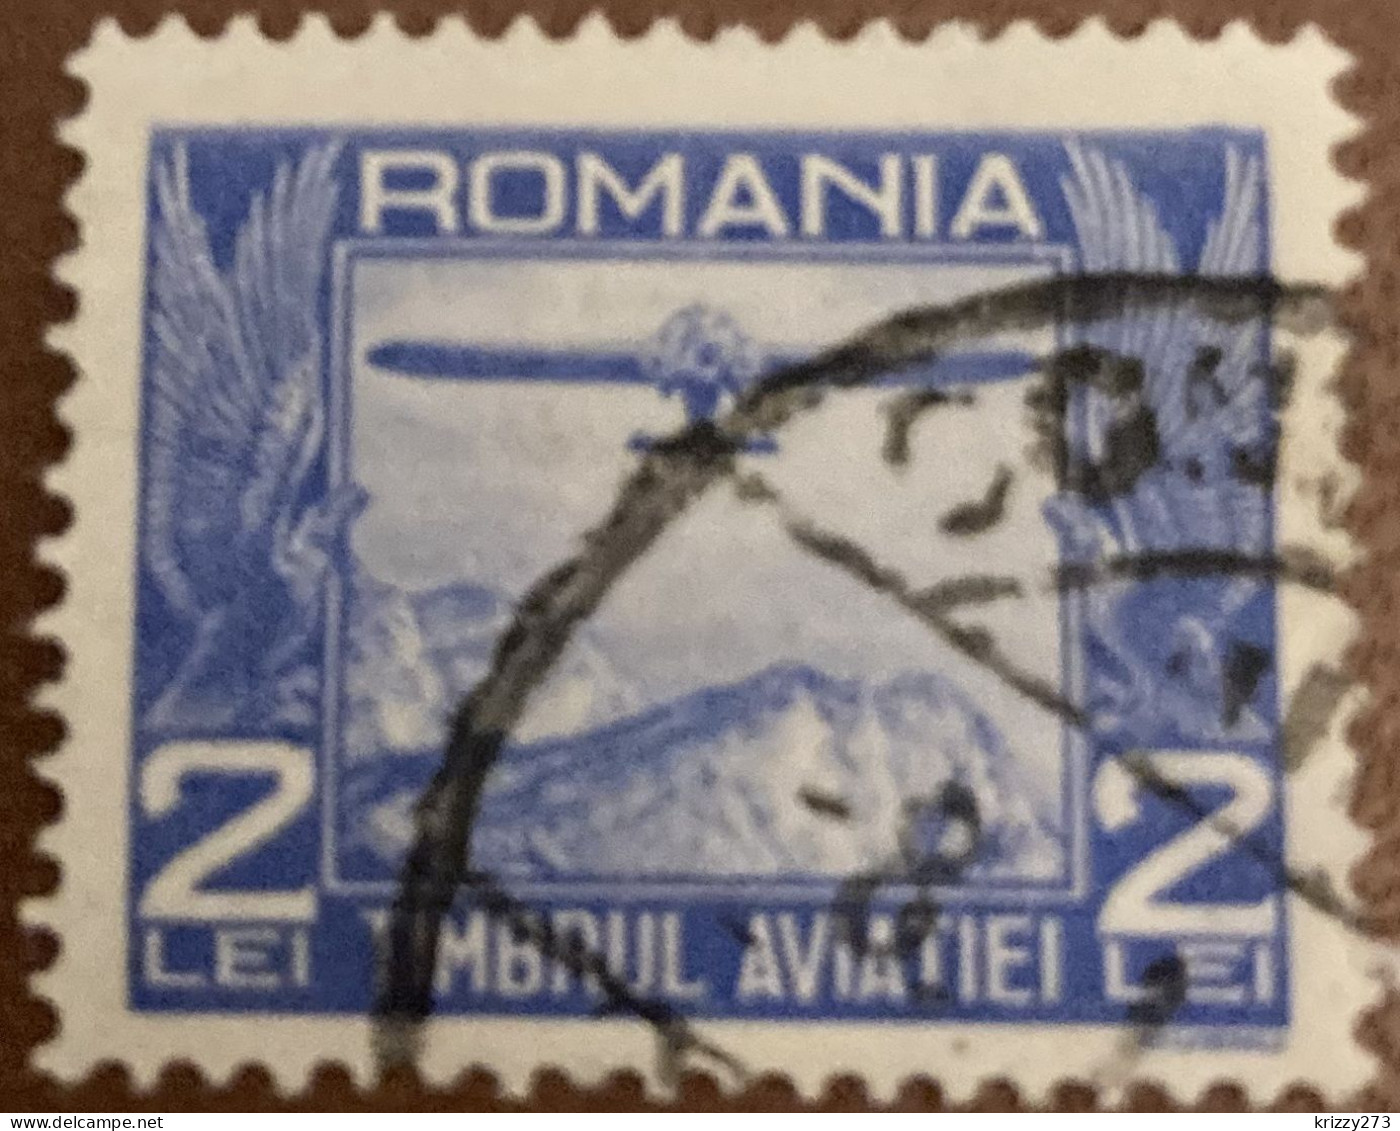 Romania 1931 National Fund Aviation 2L - Used - Fiscale Zegels